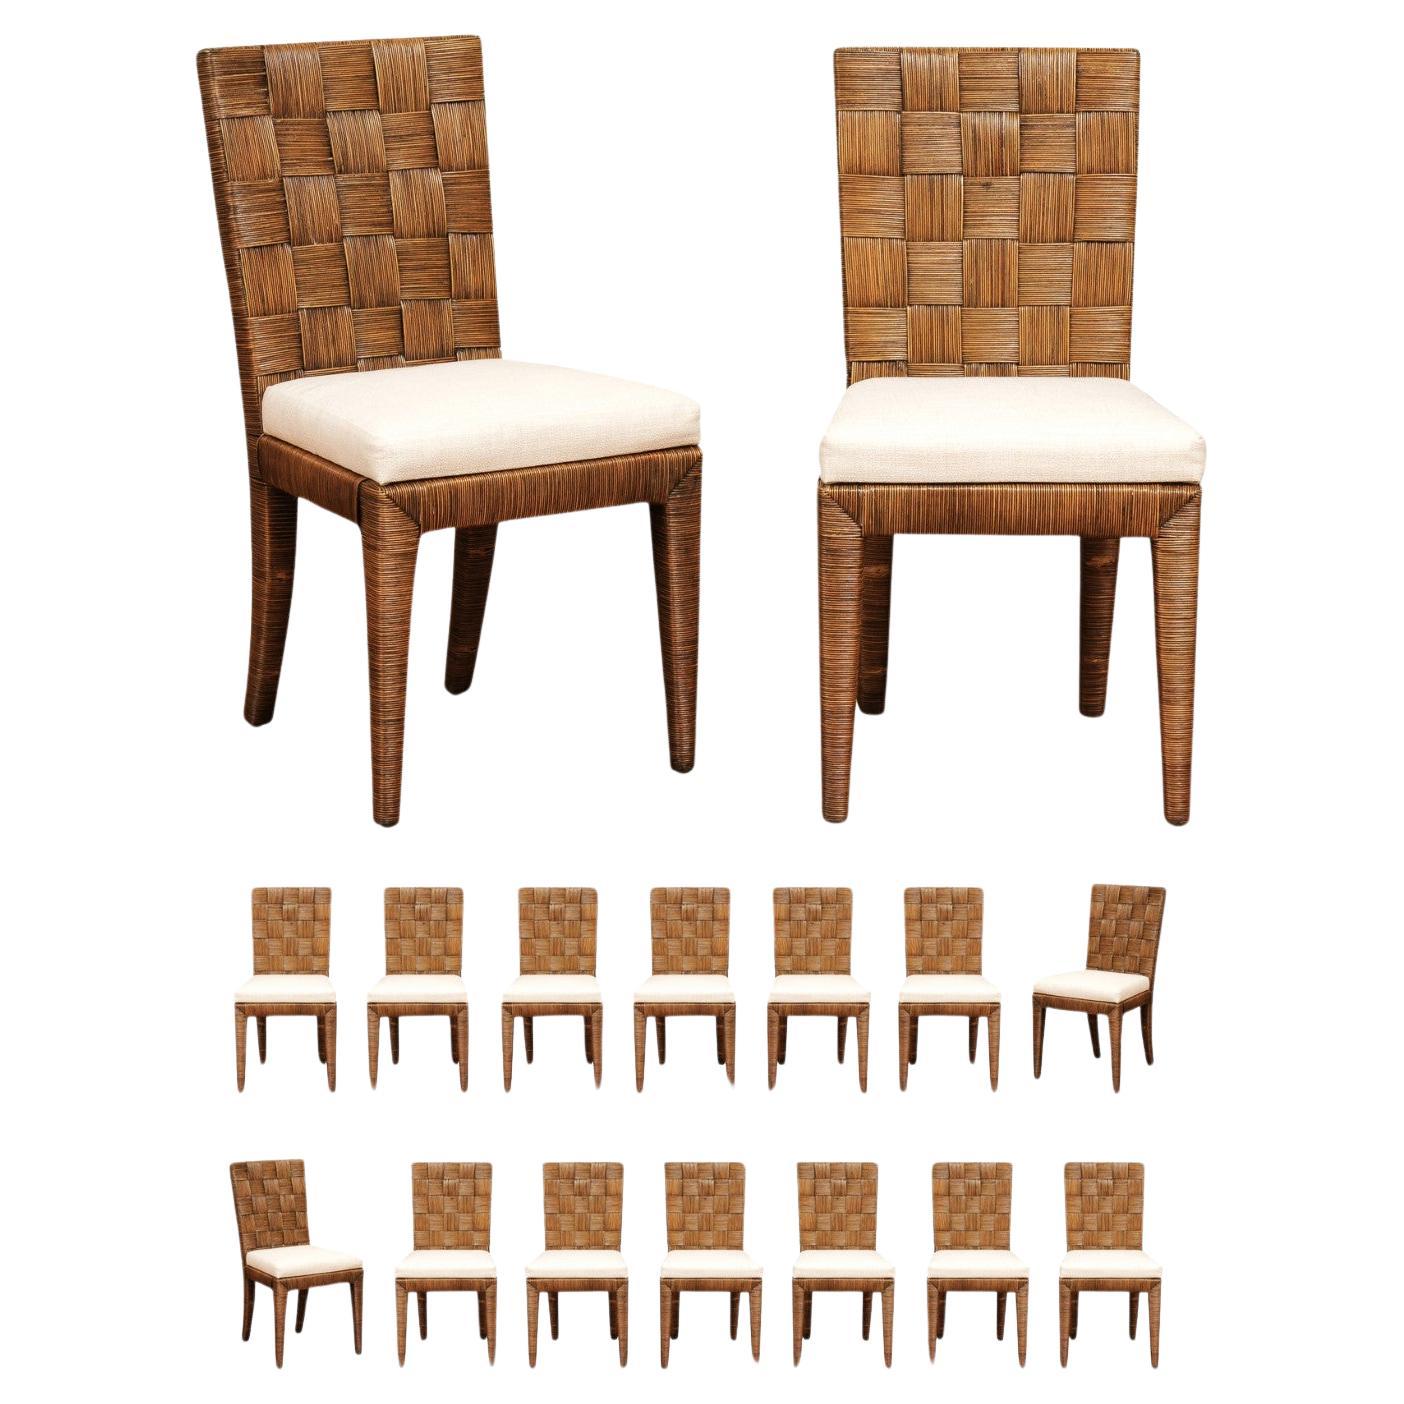 Stellar Restored Set of 16 Block Island Cane Chairs by John Hutton for Donghia For Sale